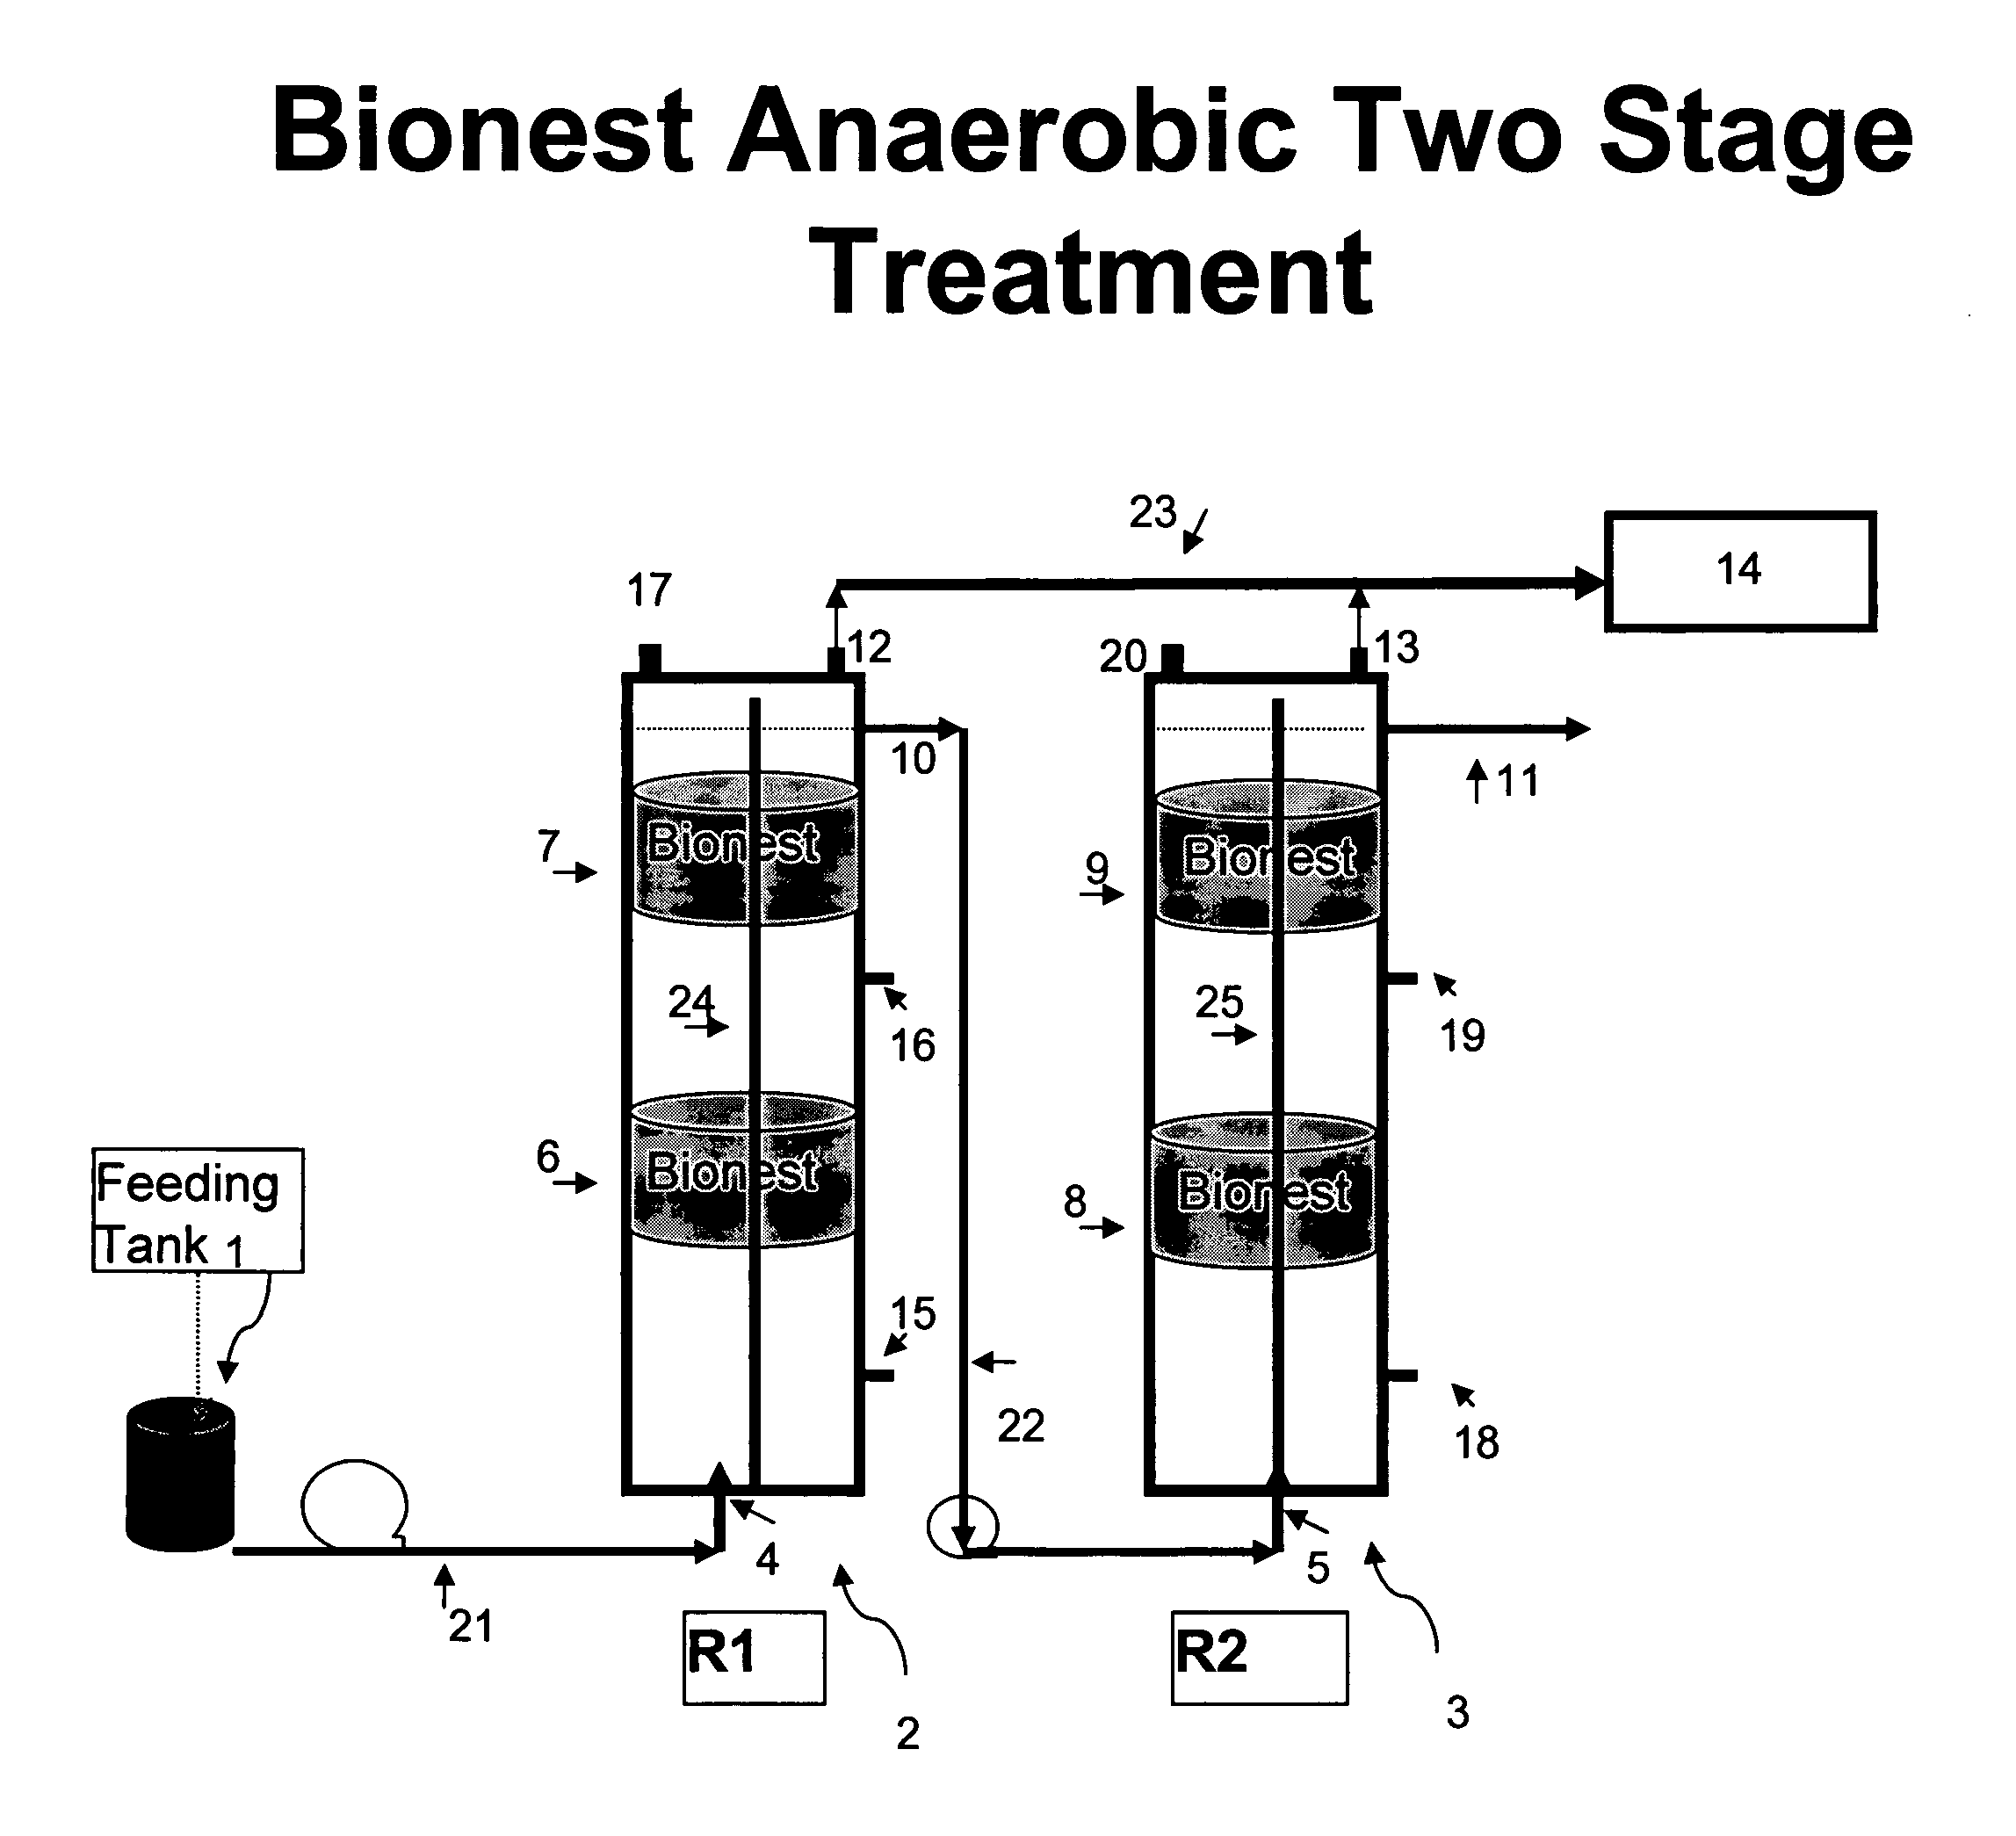 Bionest reactor for the application of anaerobic wastewater treatment and bioenergy recovery